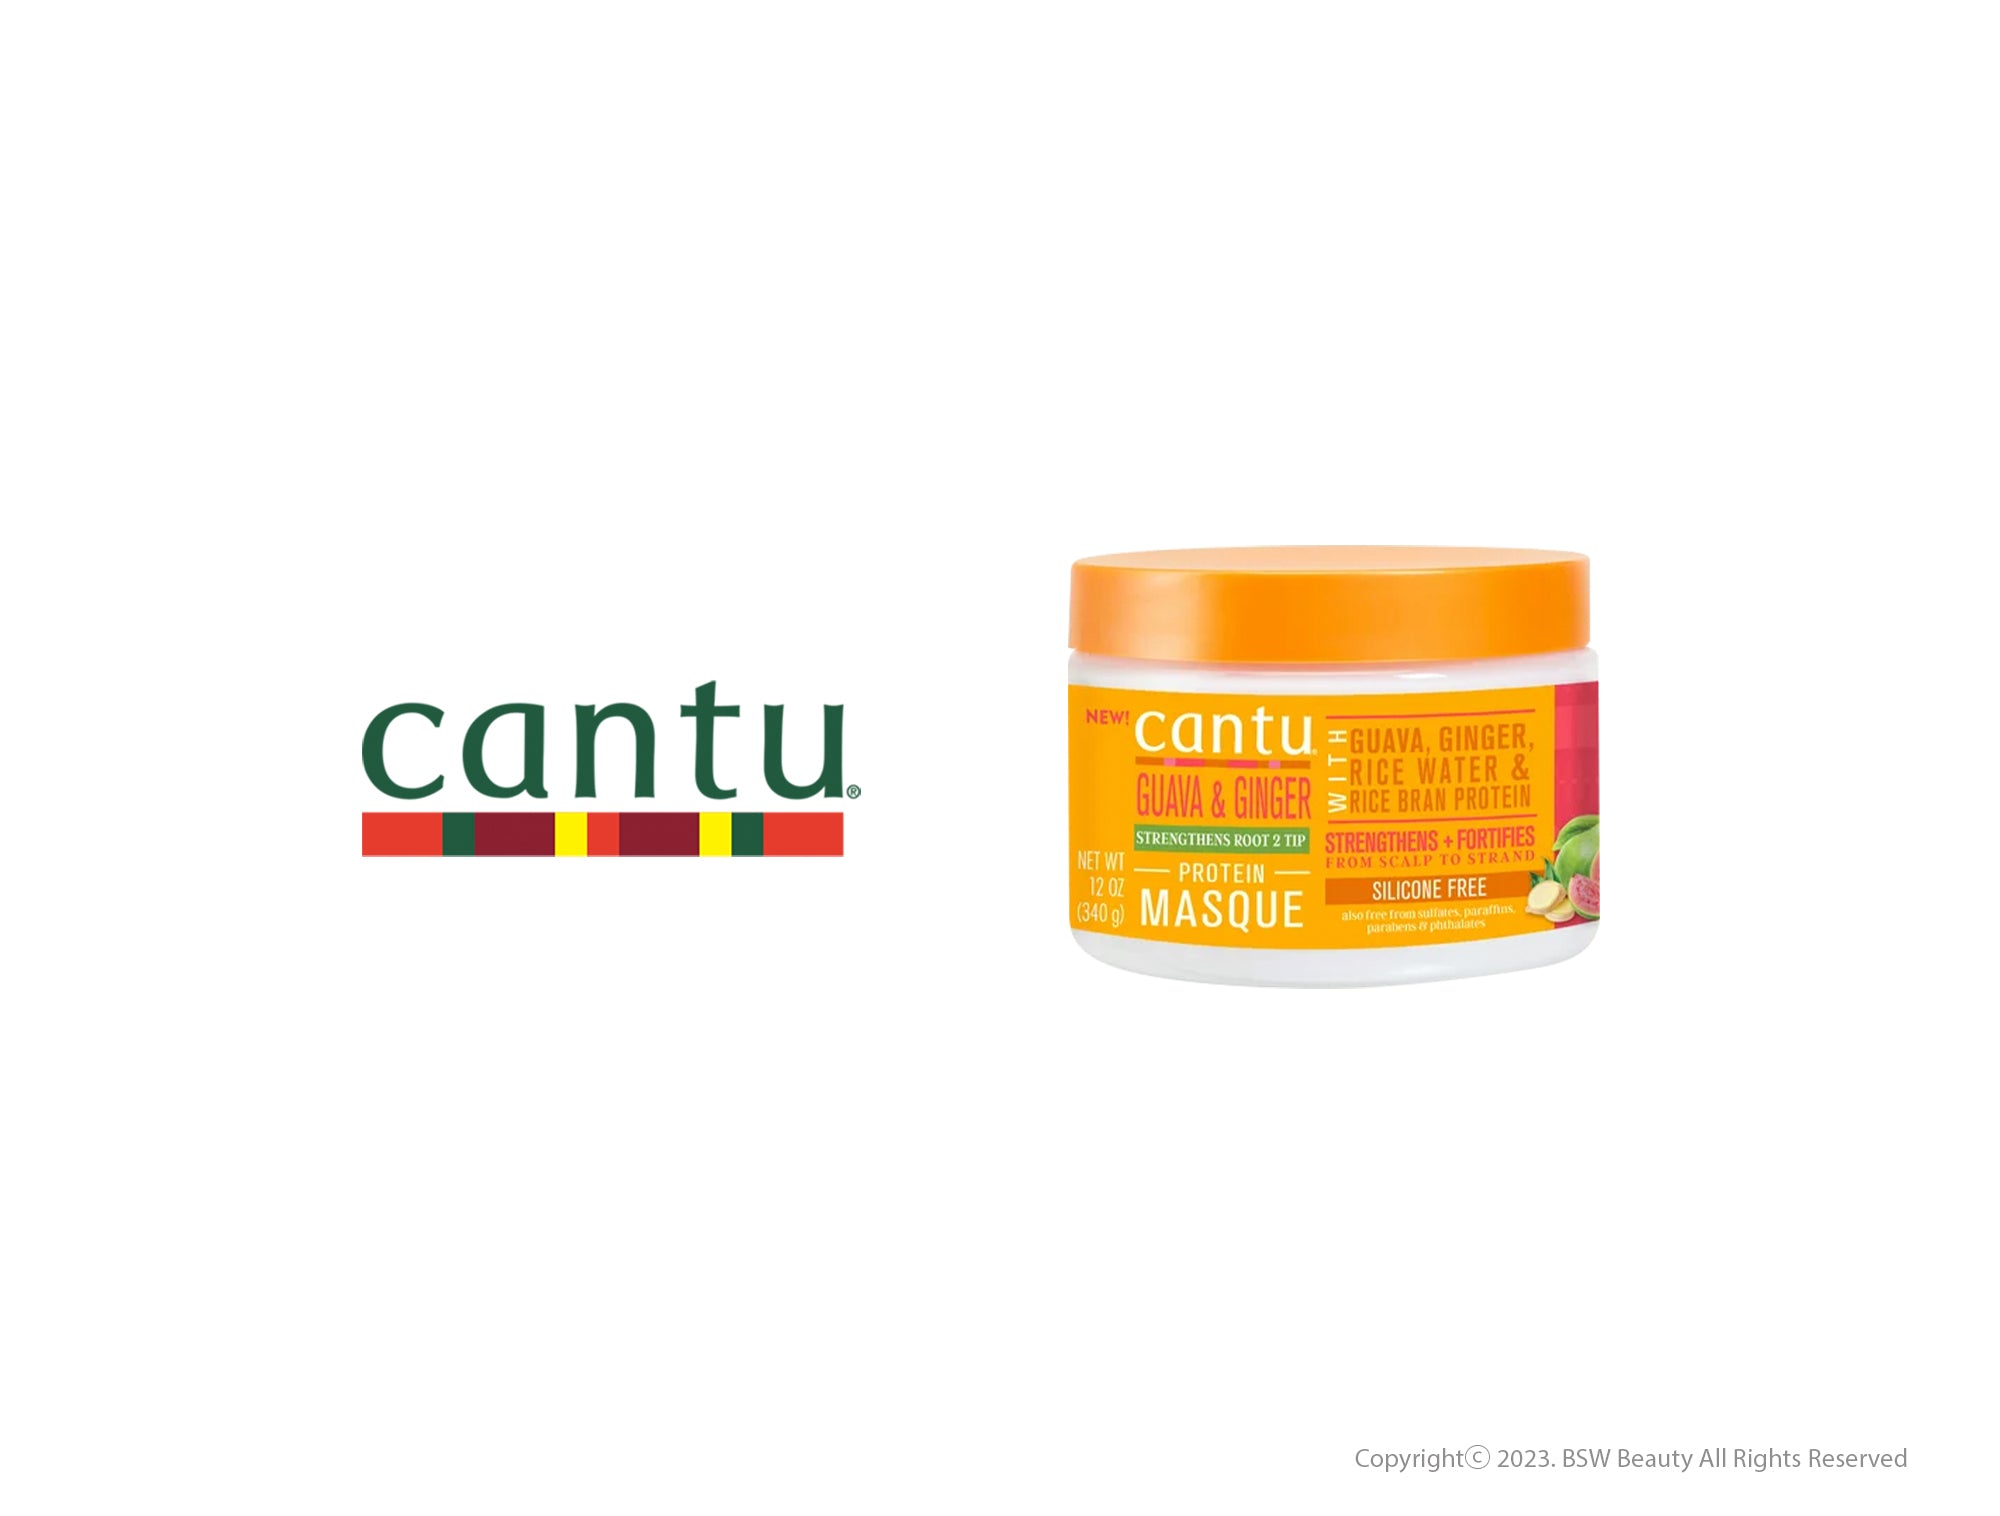 CANTU GUAVA & GINGER RICE WATER PROTEIN COND MASQUE 12oz